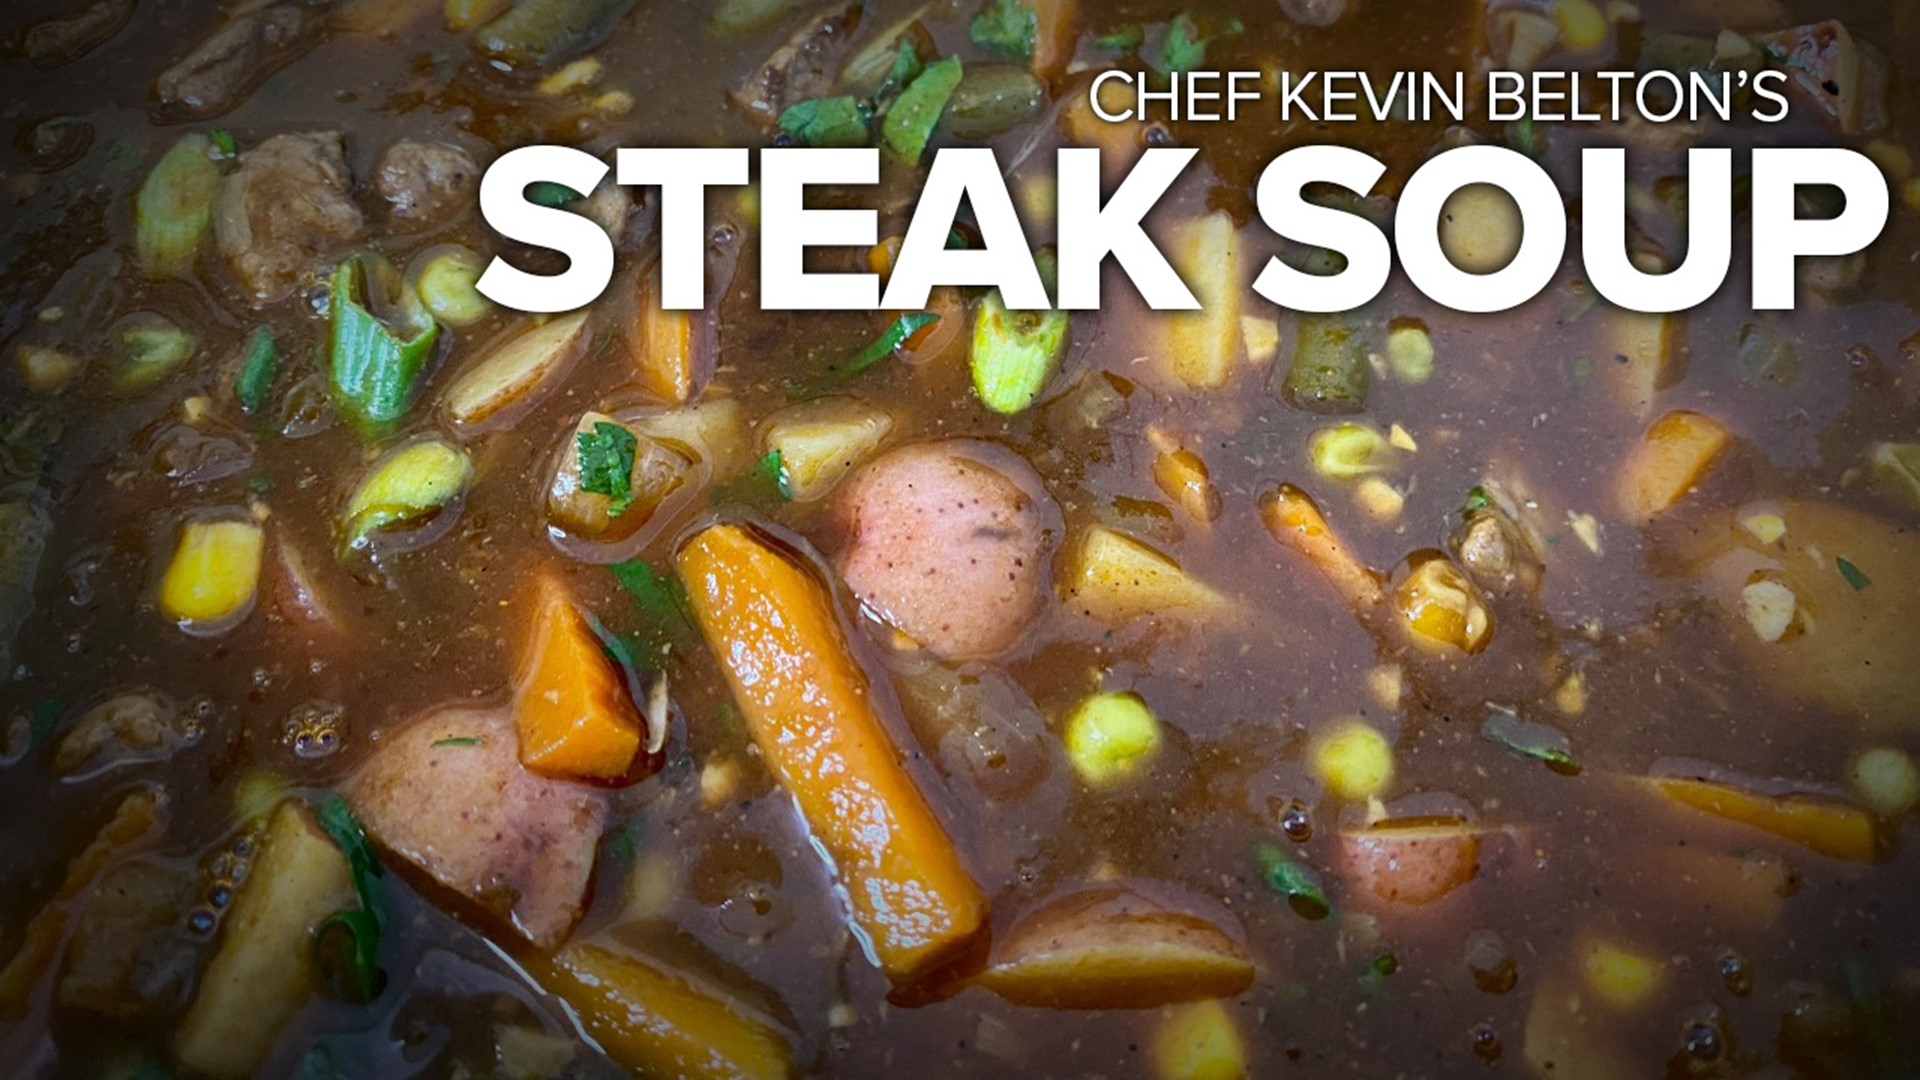 I'm not a big steak eater, but I know a lot of people who are. We ALL love this hearty steak soup!